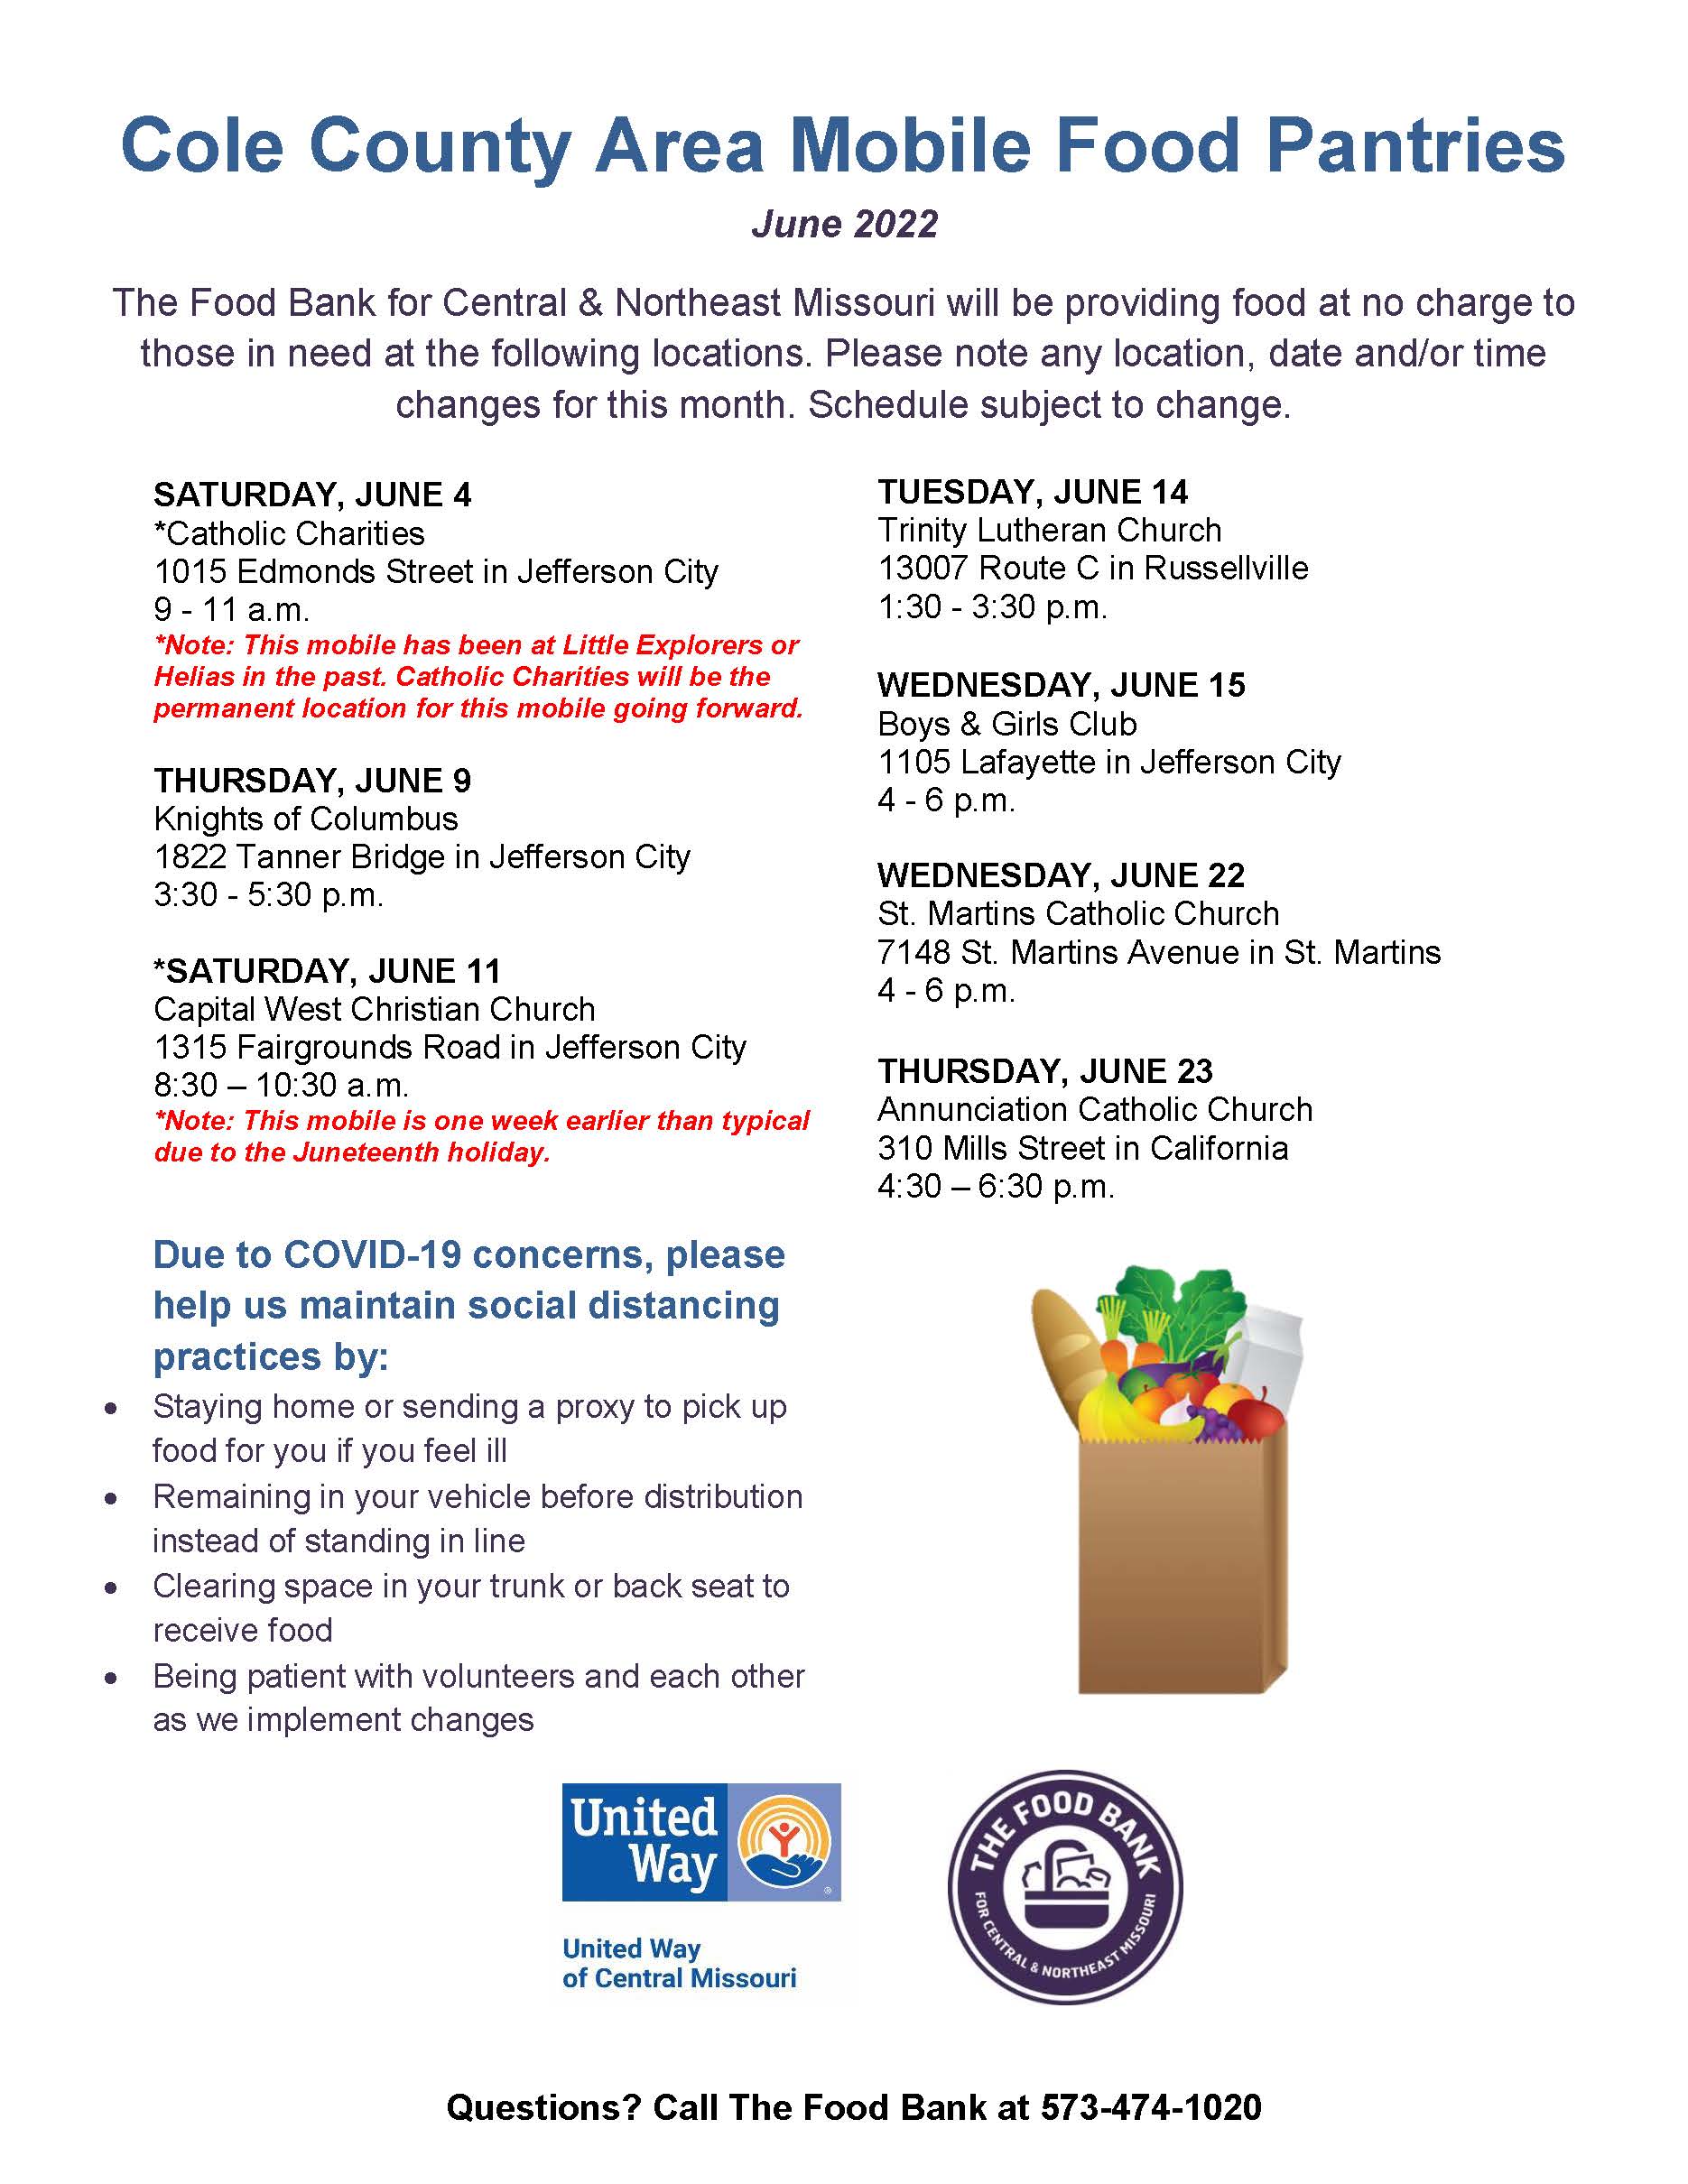 June 2022 Cole County Area Mobile Food Pantry Flyer   Updated 